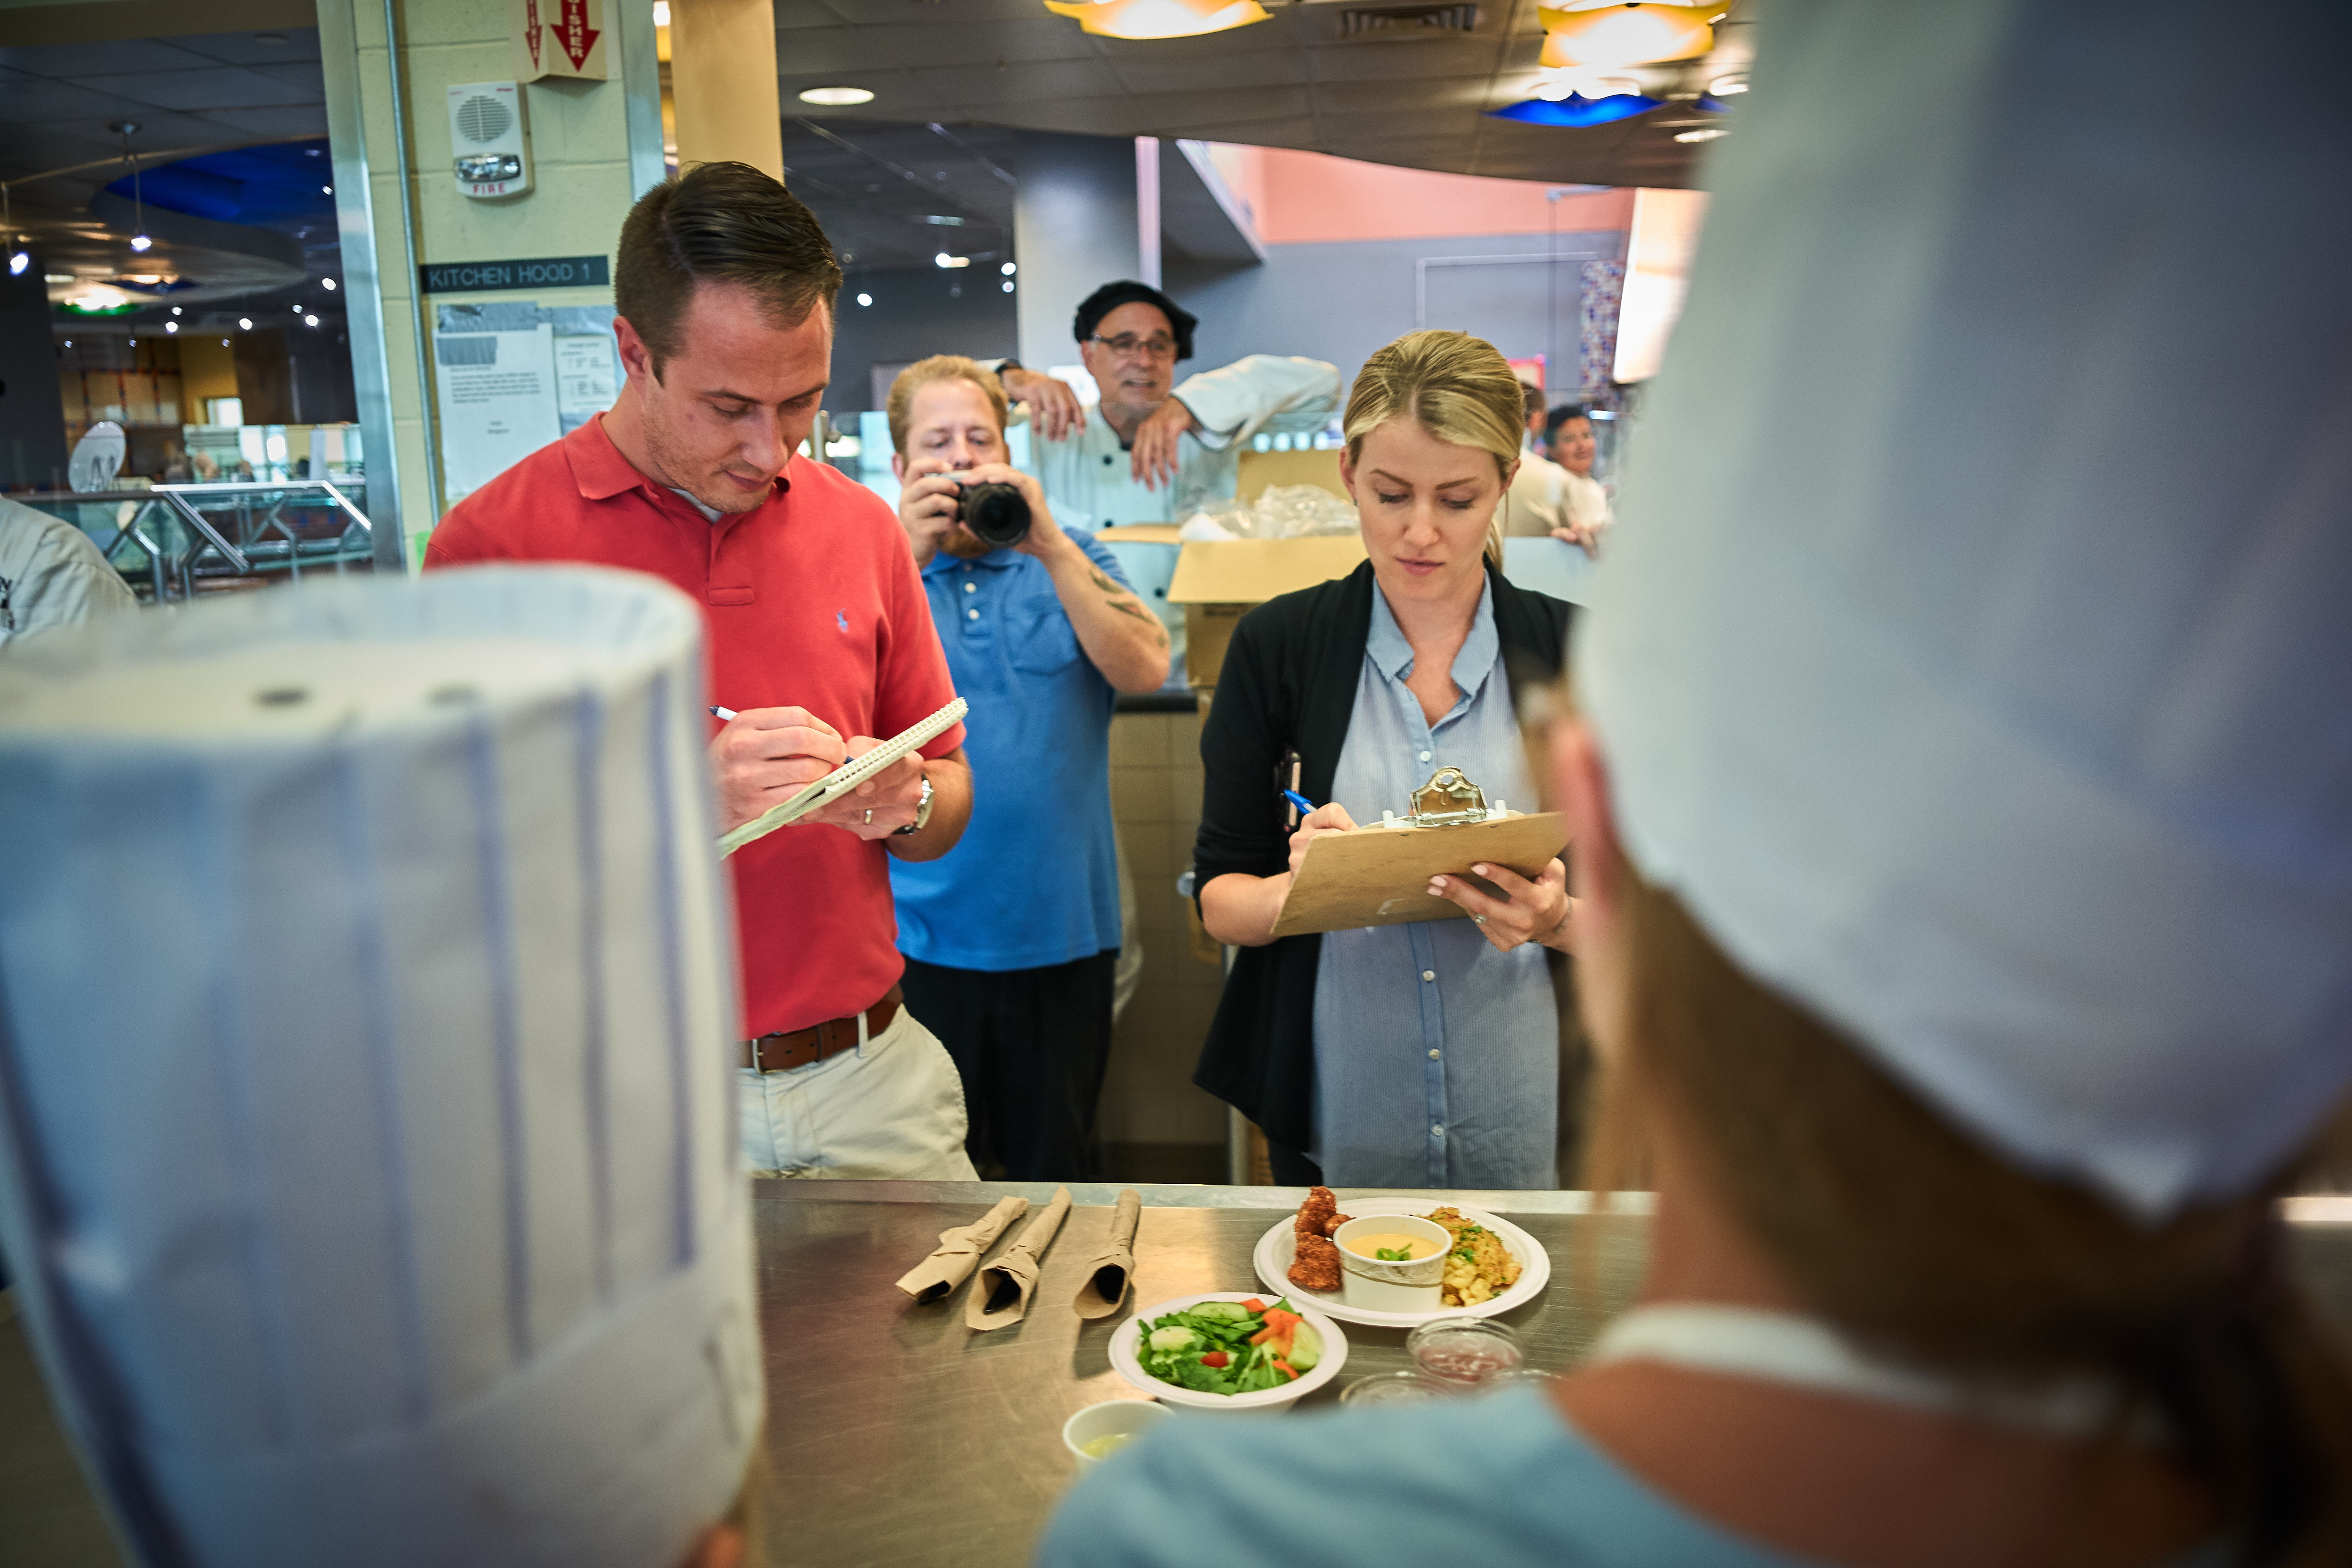 Alex Morley, left, and Jen Steszewski, both of the dining services business office, grade an entry during a competition at the UCann Cook Camp at Gelfenbien Commons on July 18, 2019. (Peter Morenus/UConn Photo)